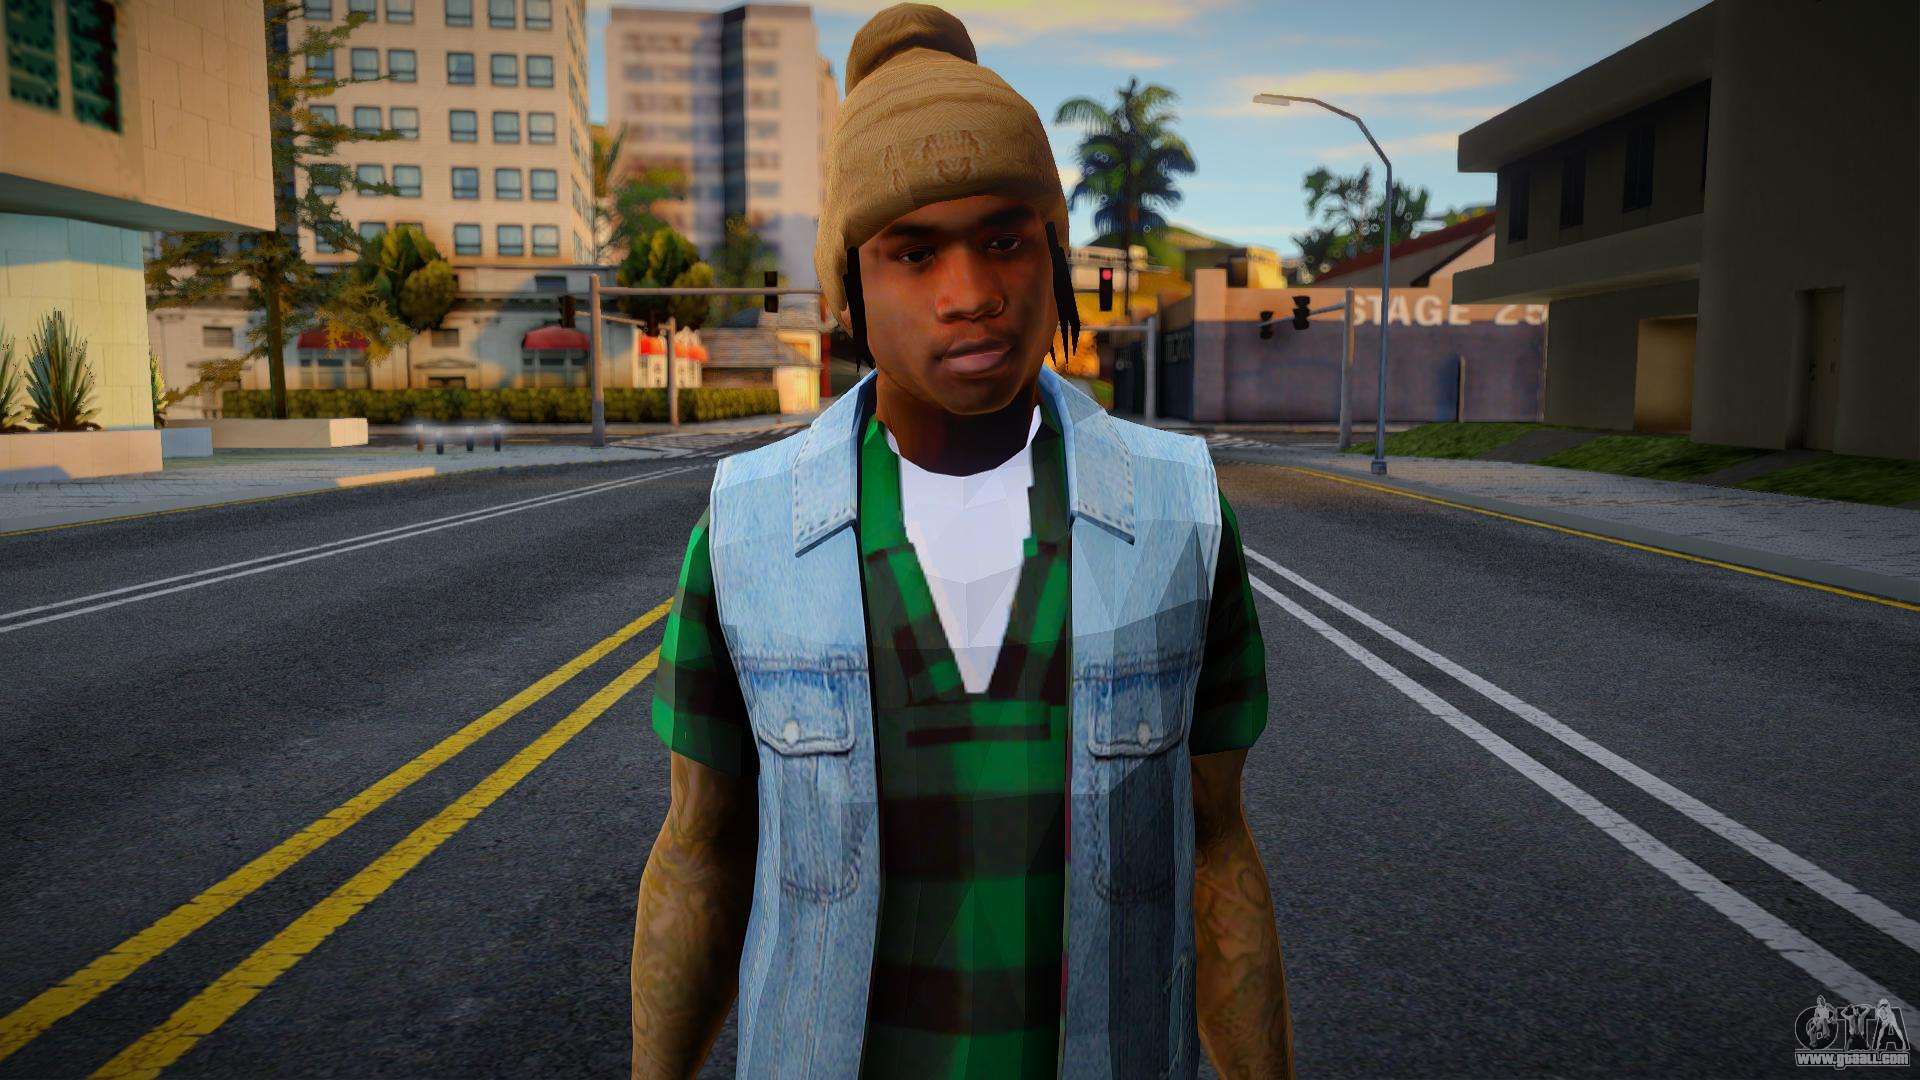 [SHW]FAM2 ARMMODS for GTA San Andreas